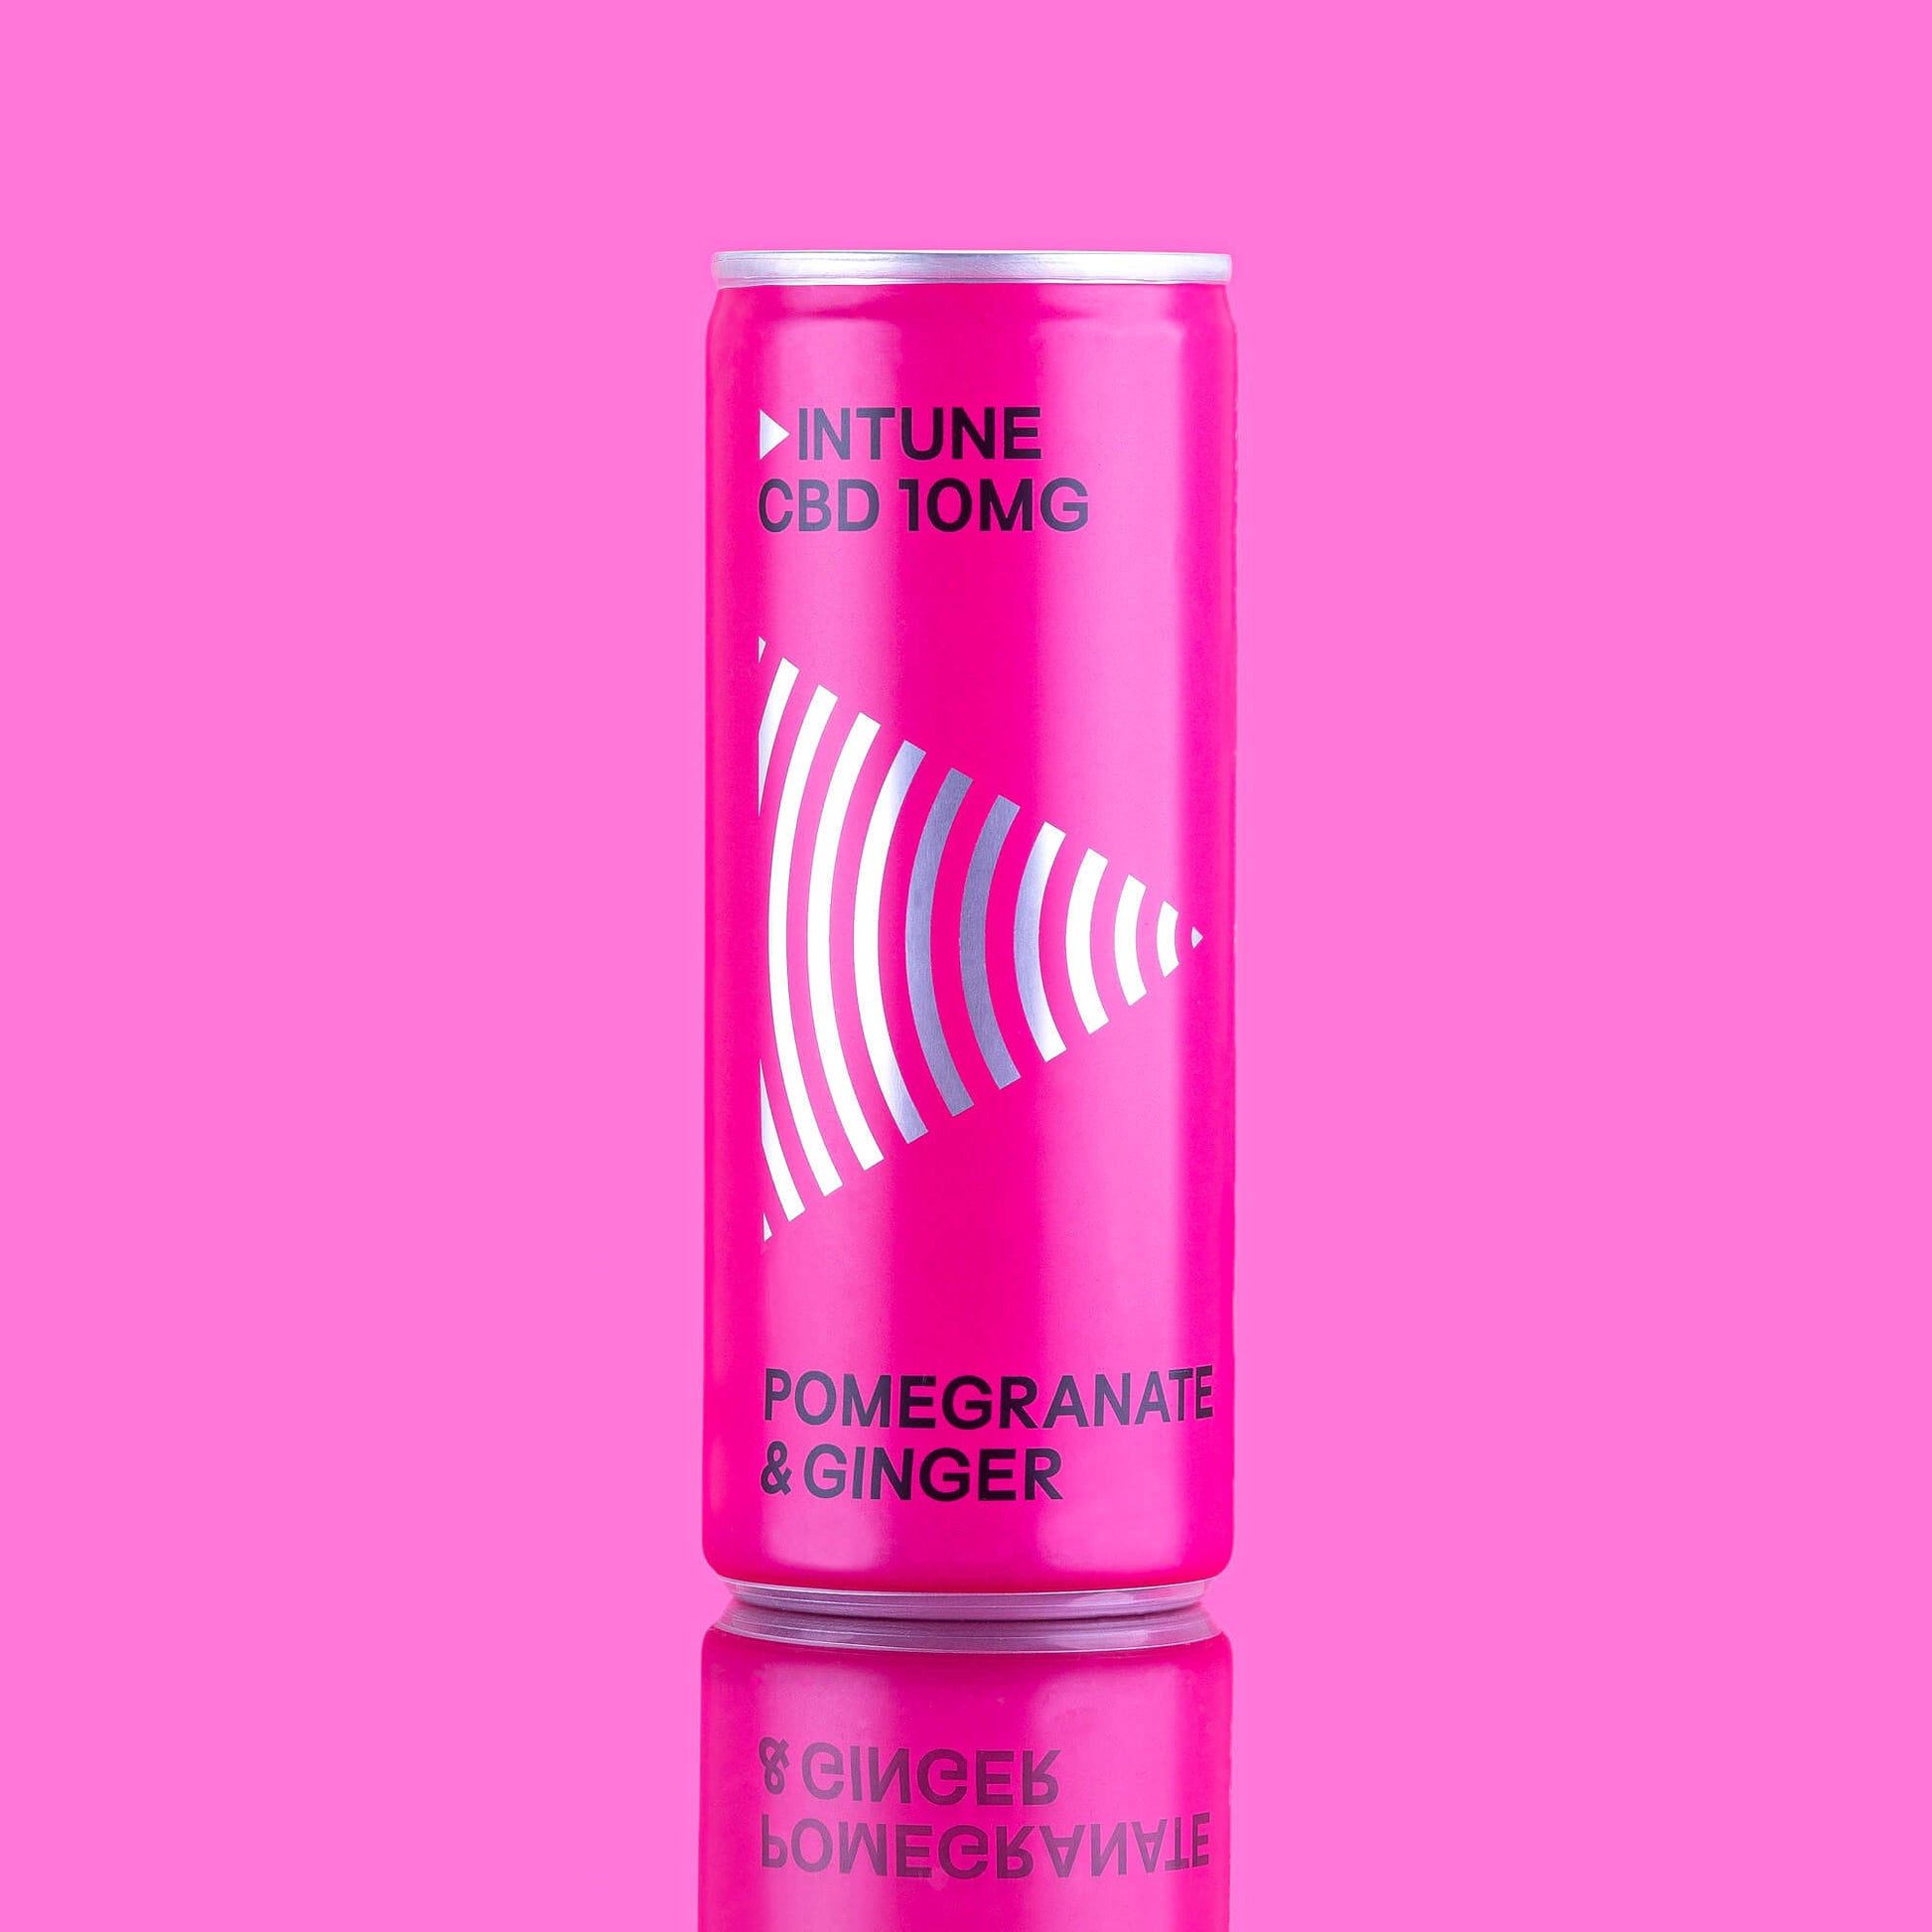 Brightly-coloured can of Pomegranate & Ginger CBD-infused drink. 10mg CBD. All natural; high quality, refreshing.